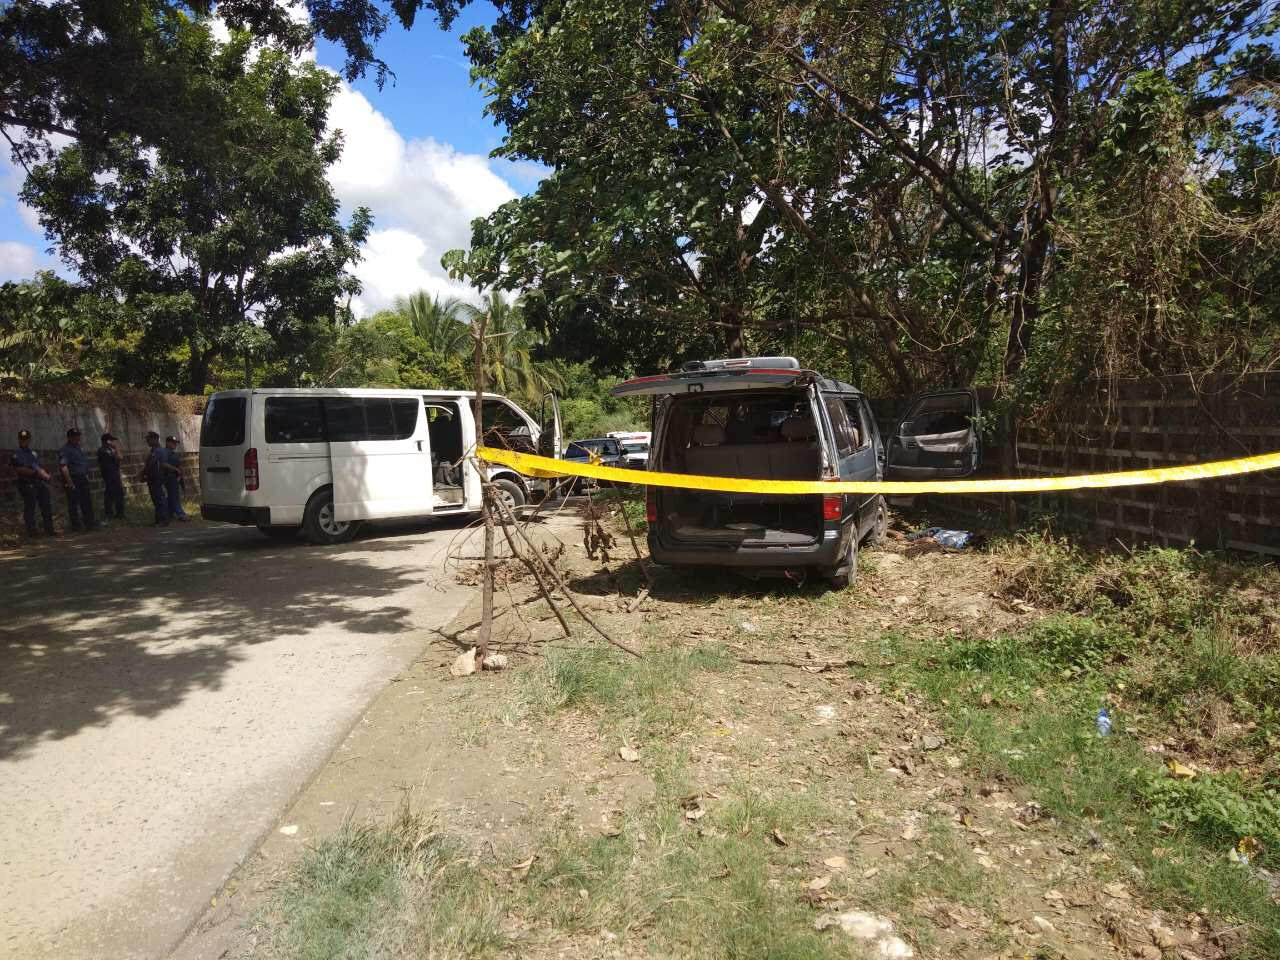 CRIME SCENE: Three alleged contract killers were killed in a shootout after refusing to stop at a police checkpoint in Taysan, Batangas. (Gray van was suspects’ vehicle). Photos from Batangas PNP